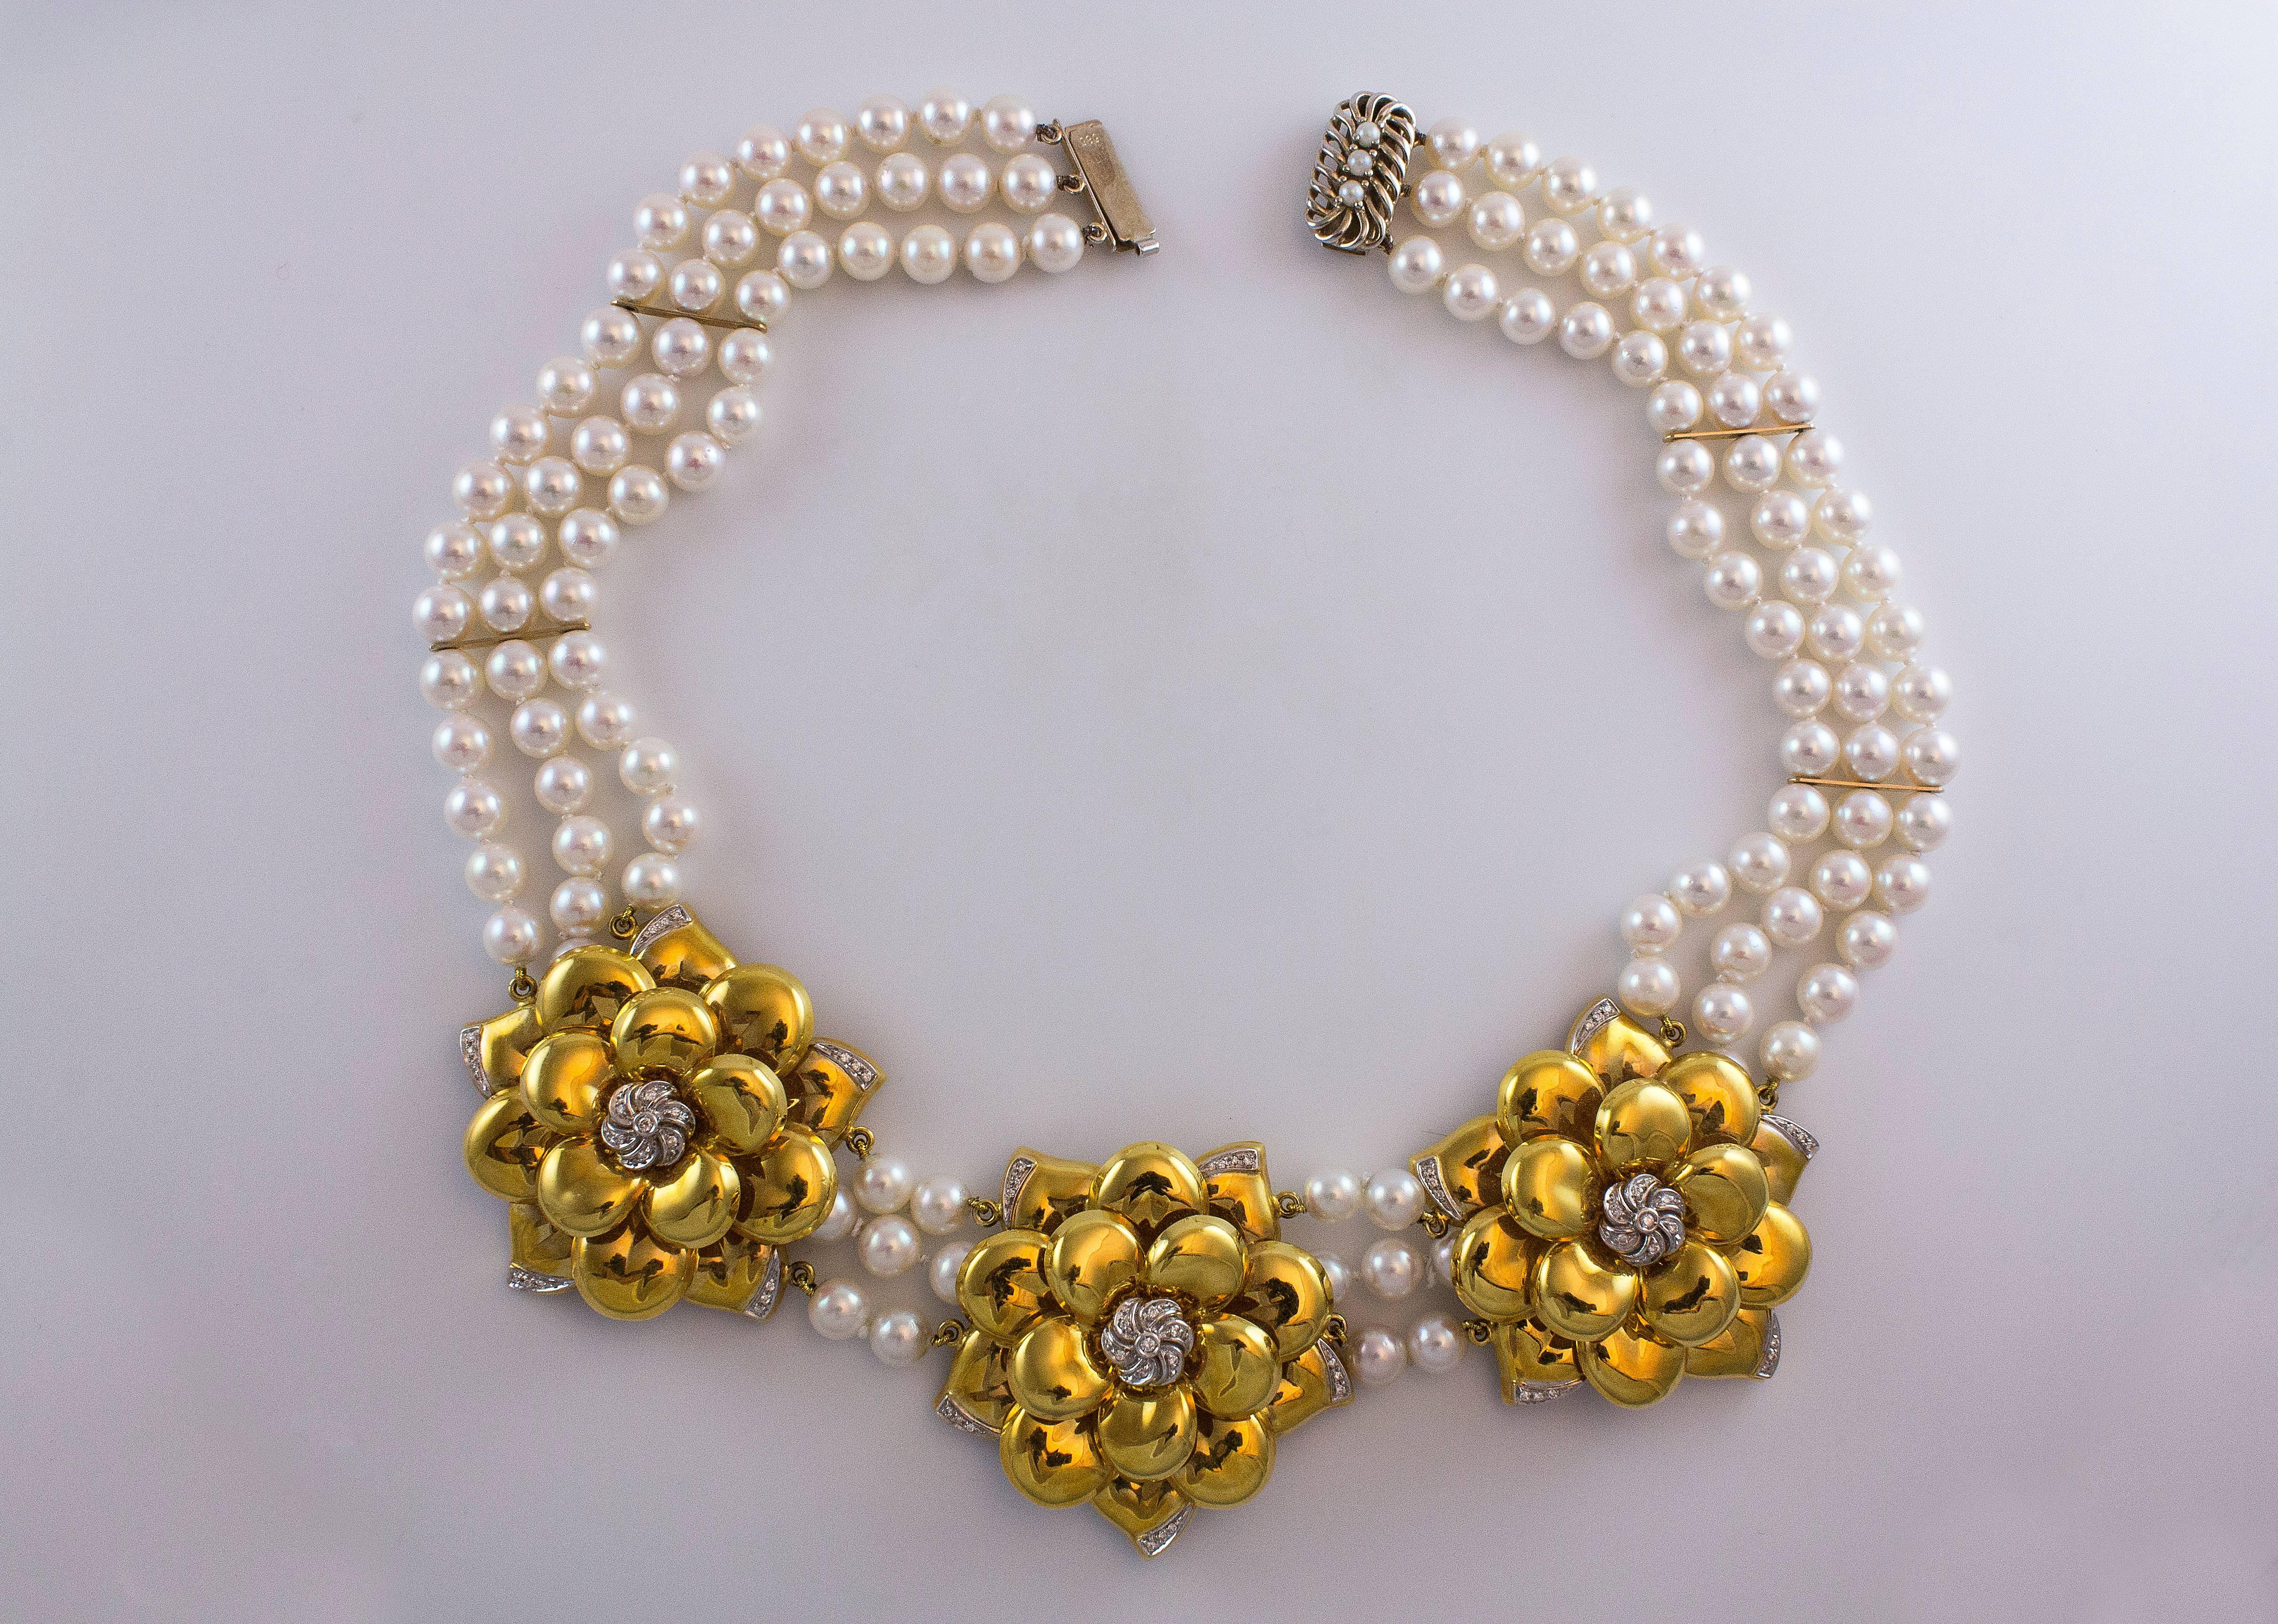 This necklace features three 18K yellow gold flowers each accented by round brilliant diamonds to the three row cultured pearl strand and 14K gold clasp. The pearls has a great luster and a beautiful pinkish tone. The gold flowers are approximately